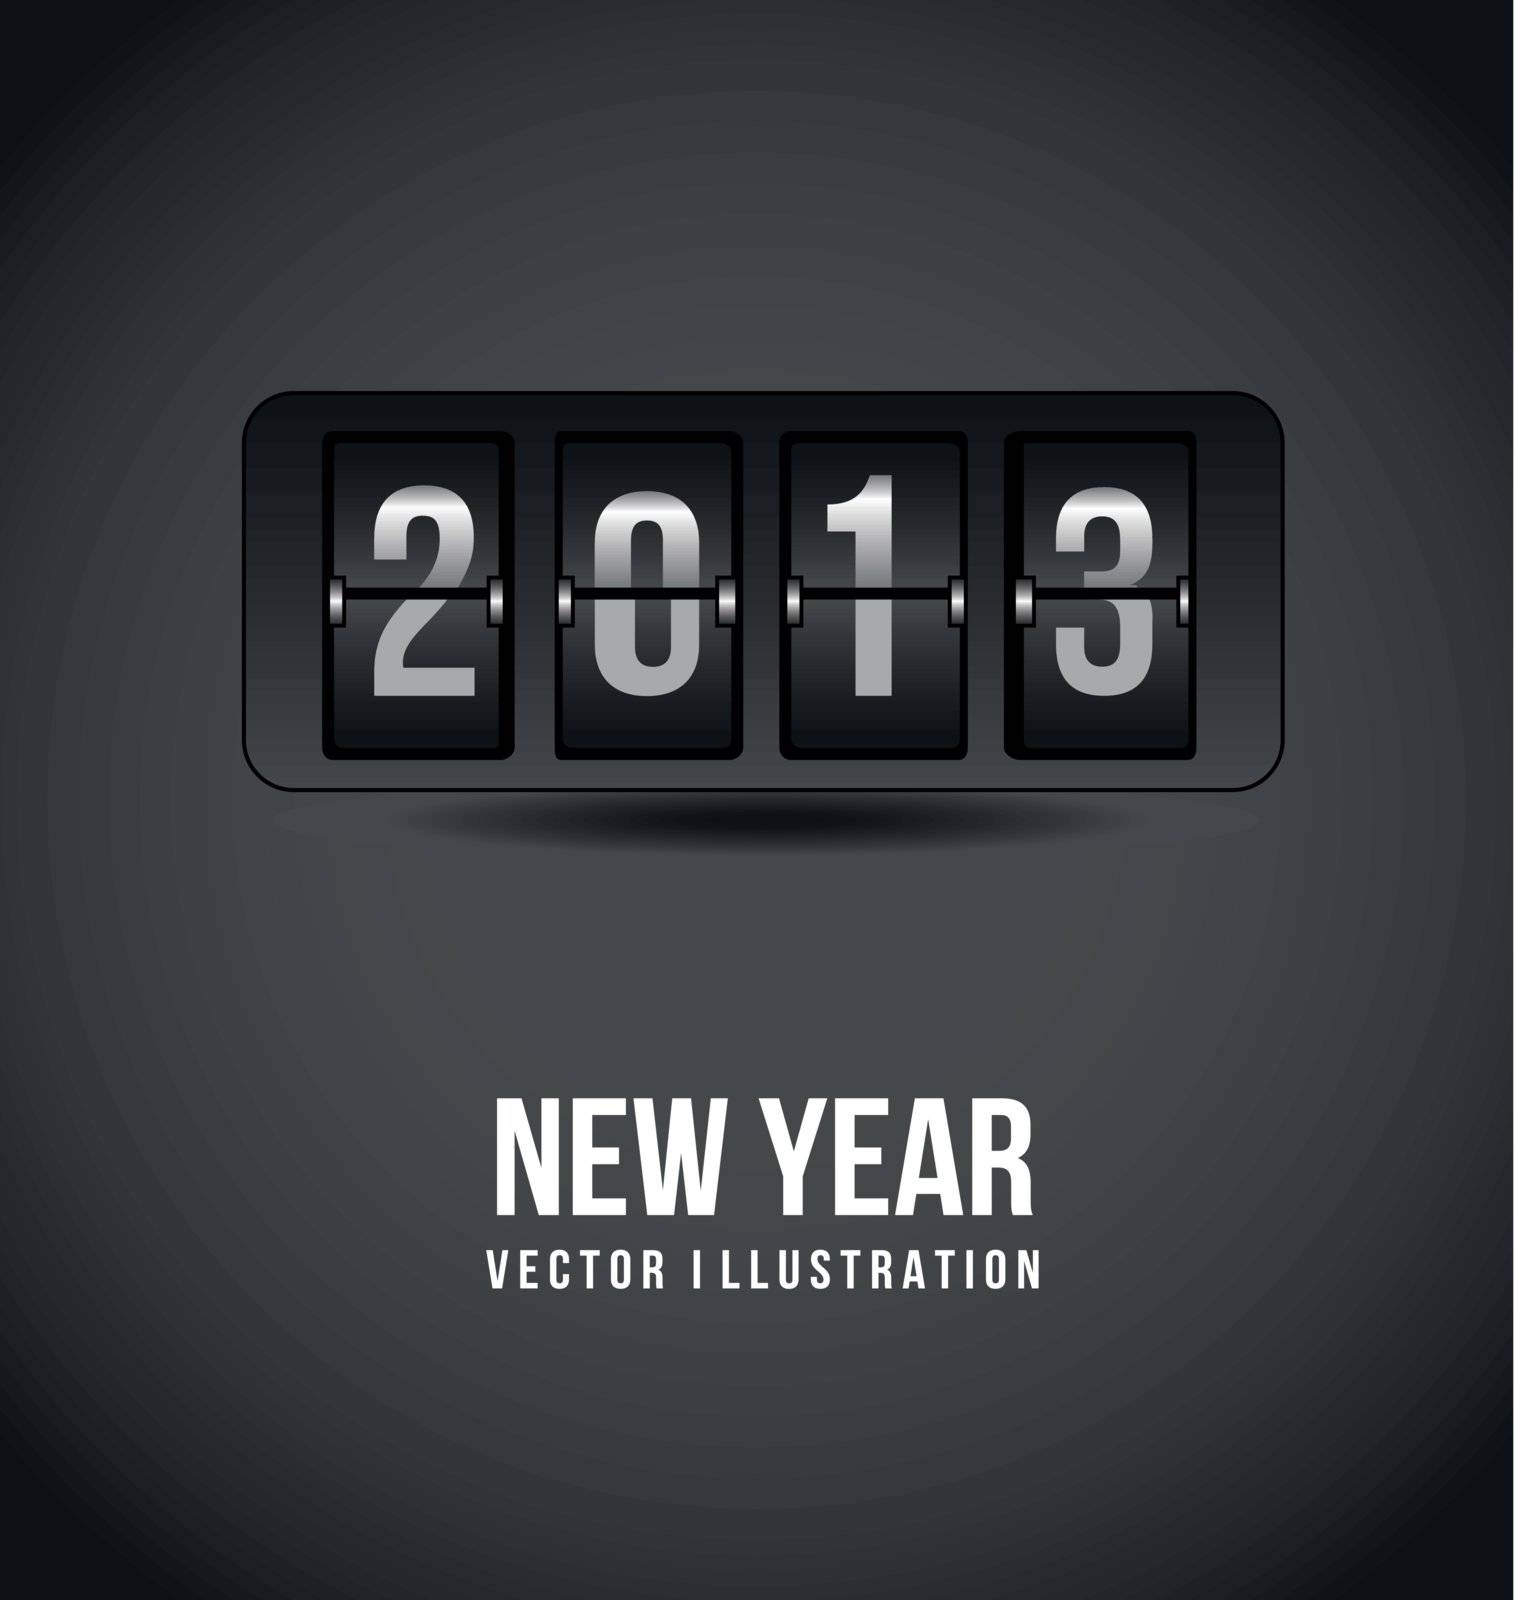 2013 new year over gray background. vector illustration